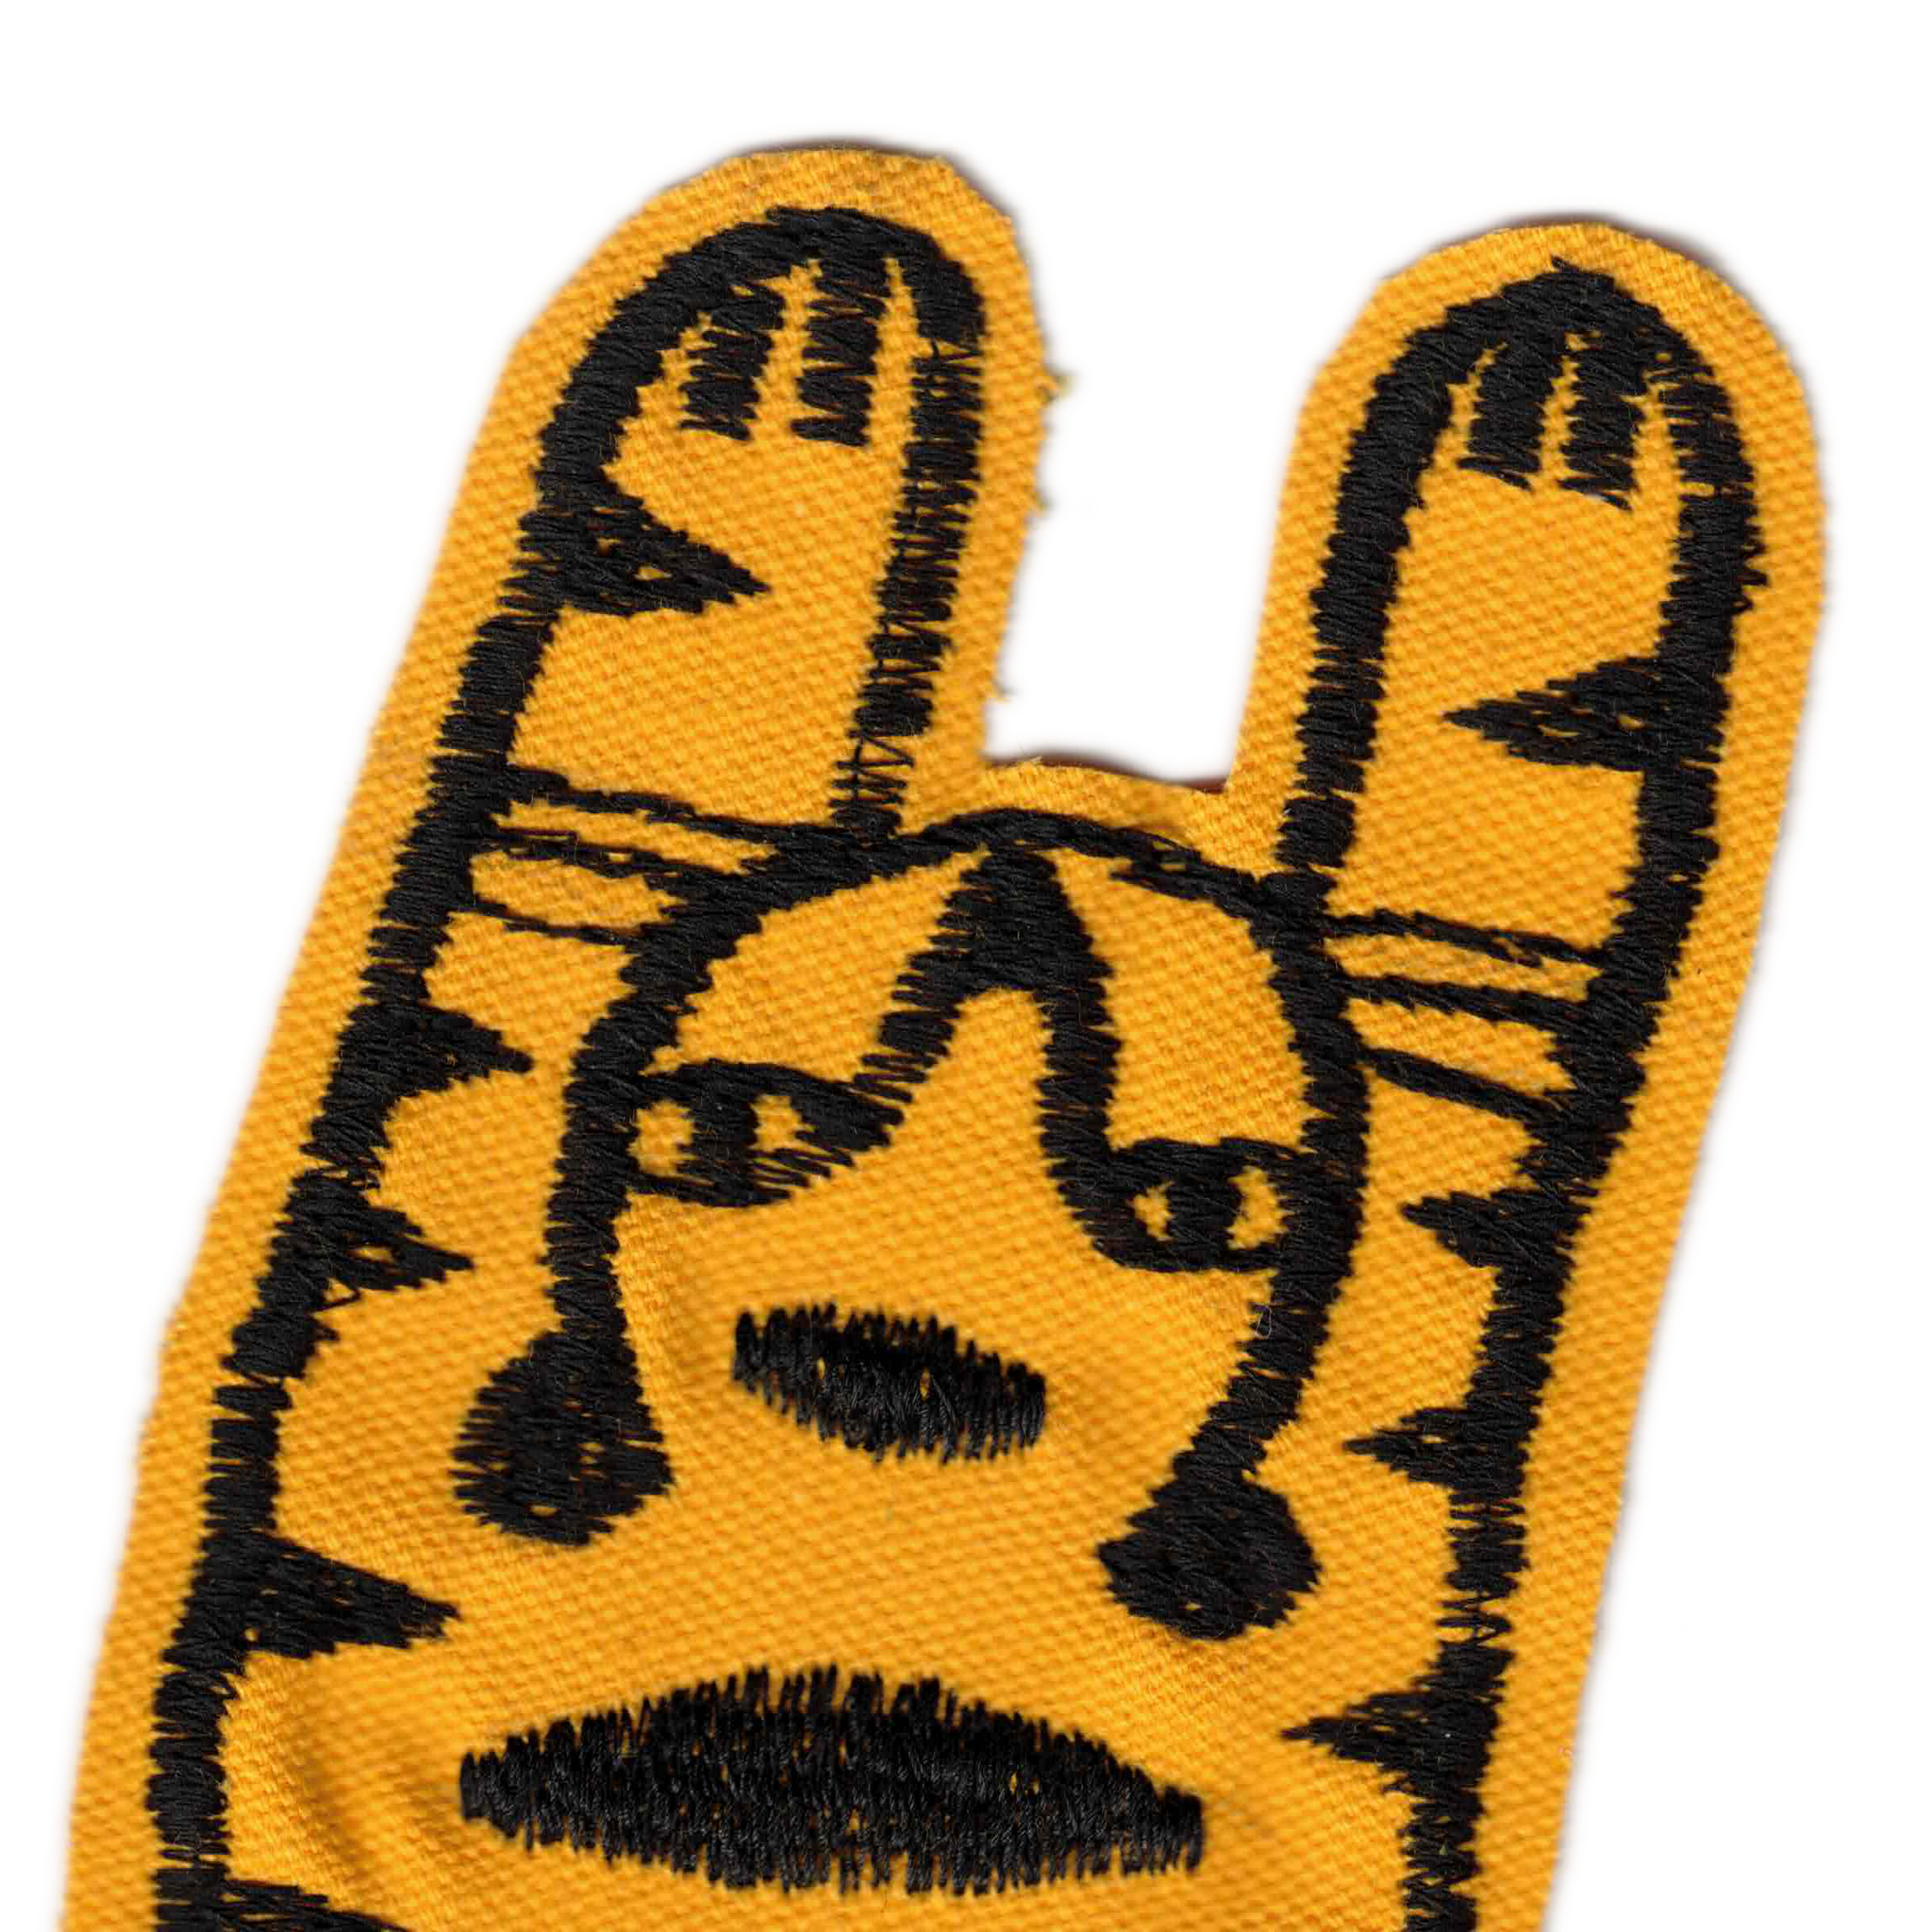 Freehand embroidered tiger patch (one)